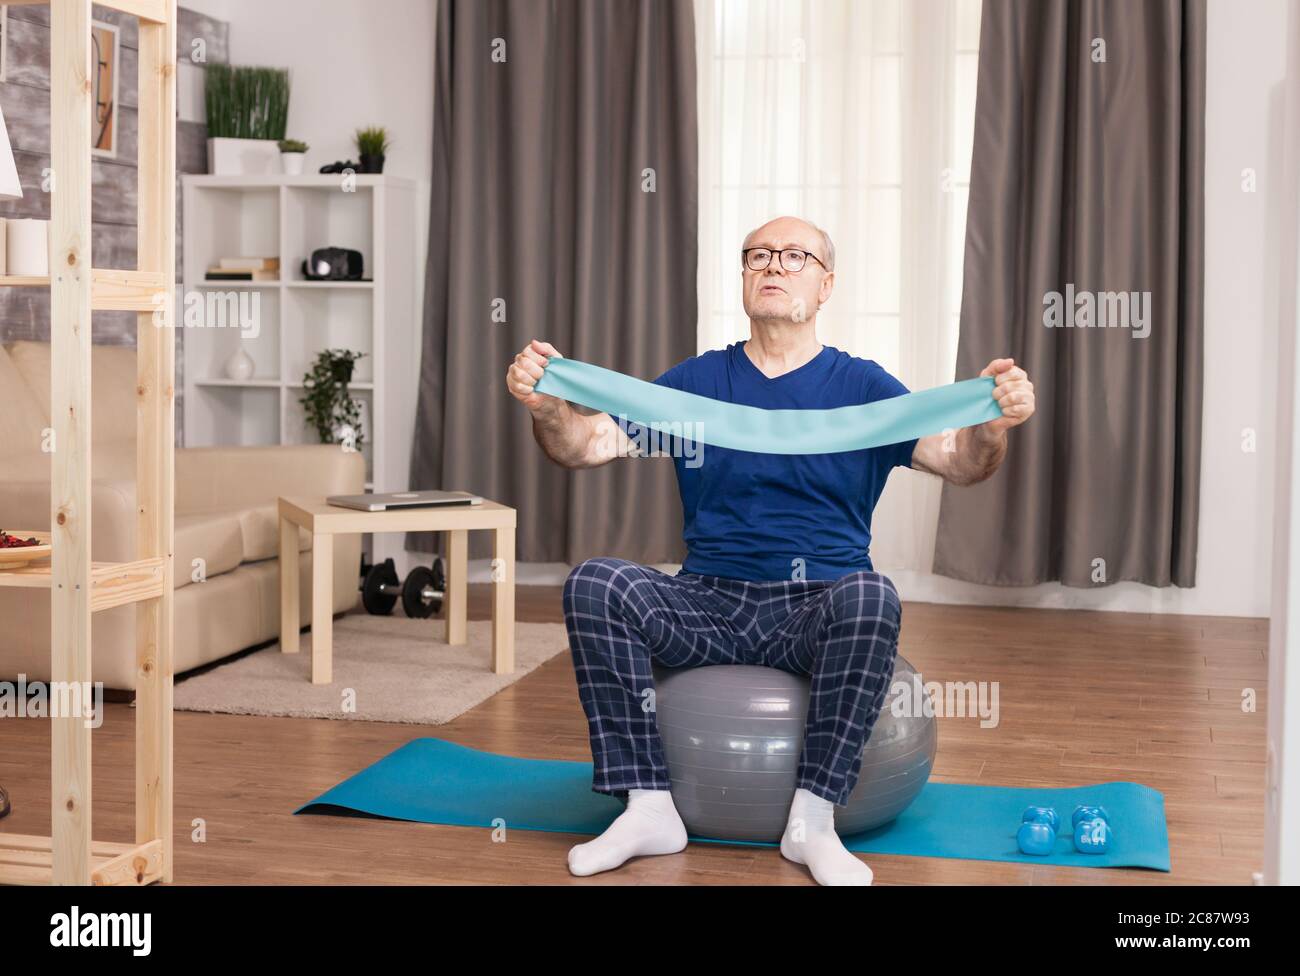 Old man using the resistance band during his training. Old person pensioner online internet exercise training at home sport activity with dumbbell, resistance band, swiss ball at elderly retirement age. Stock Photo